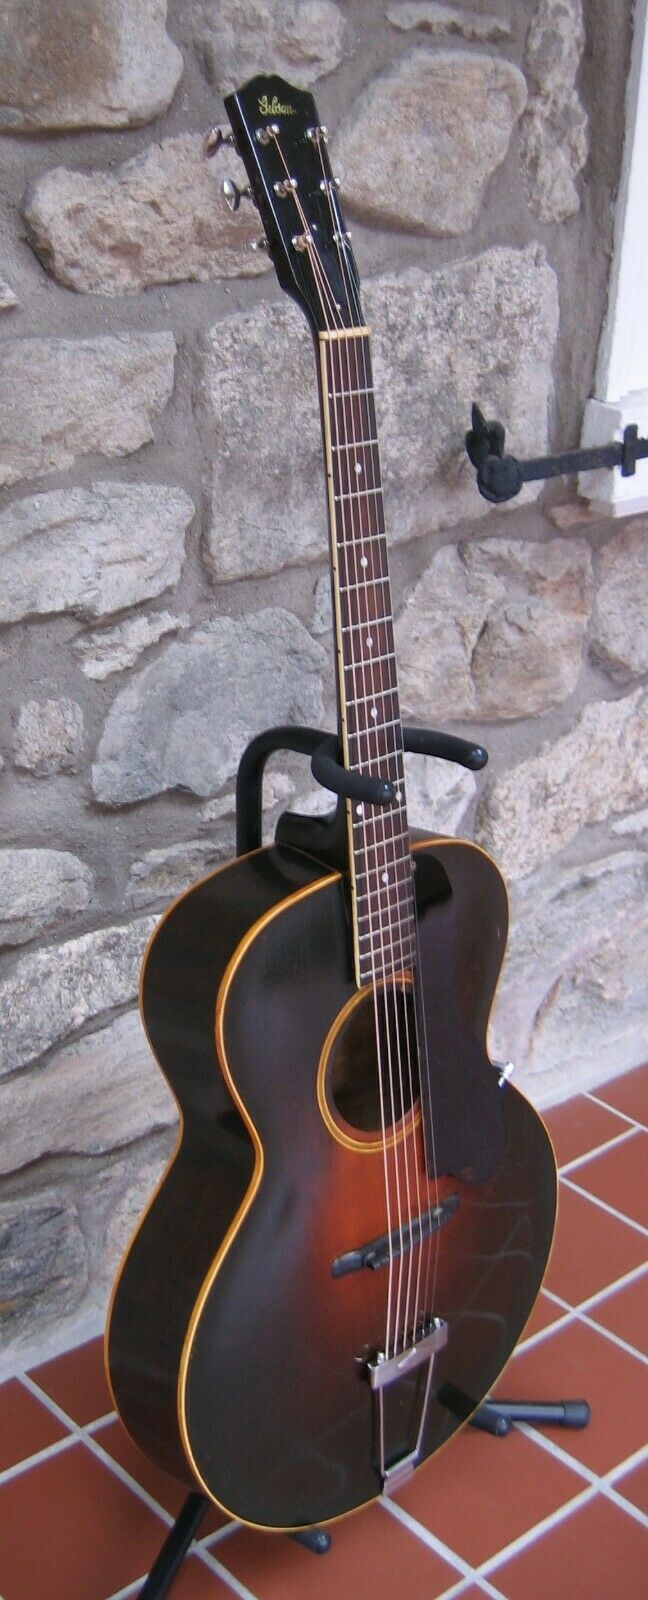 1934 Gibson L-50 Spruce and Maple - Sunburst Archtop